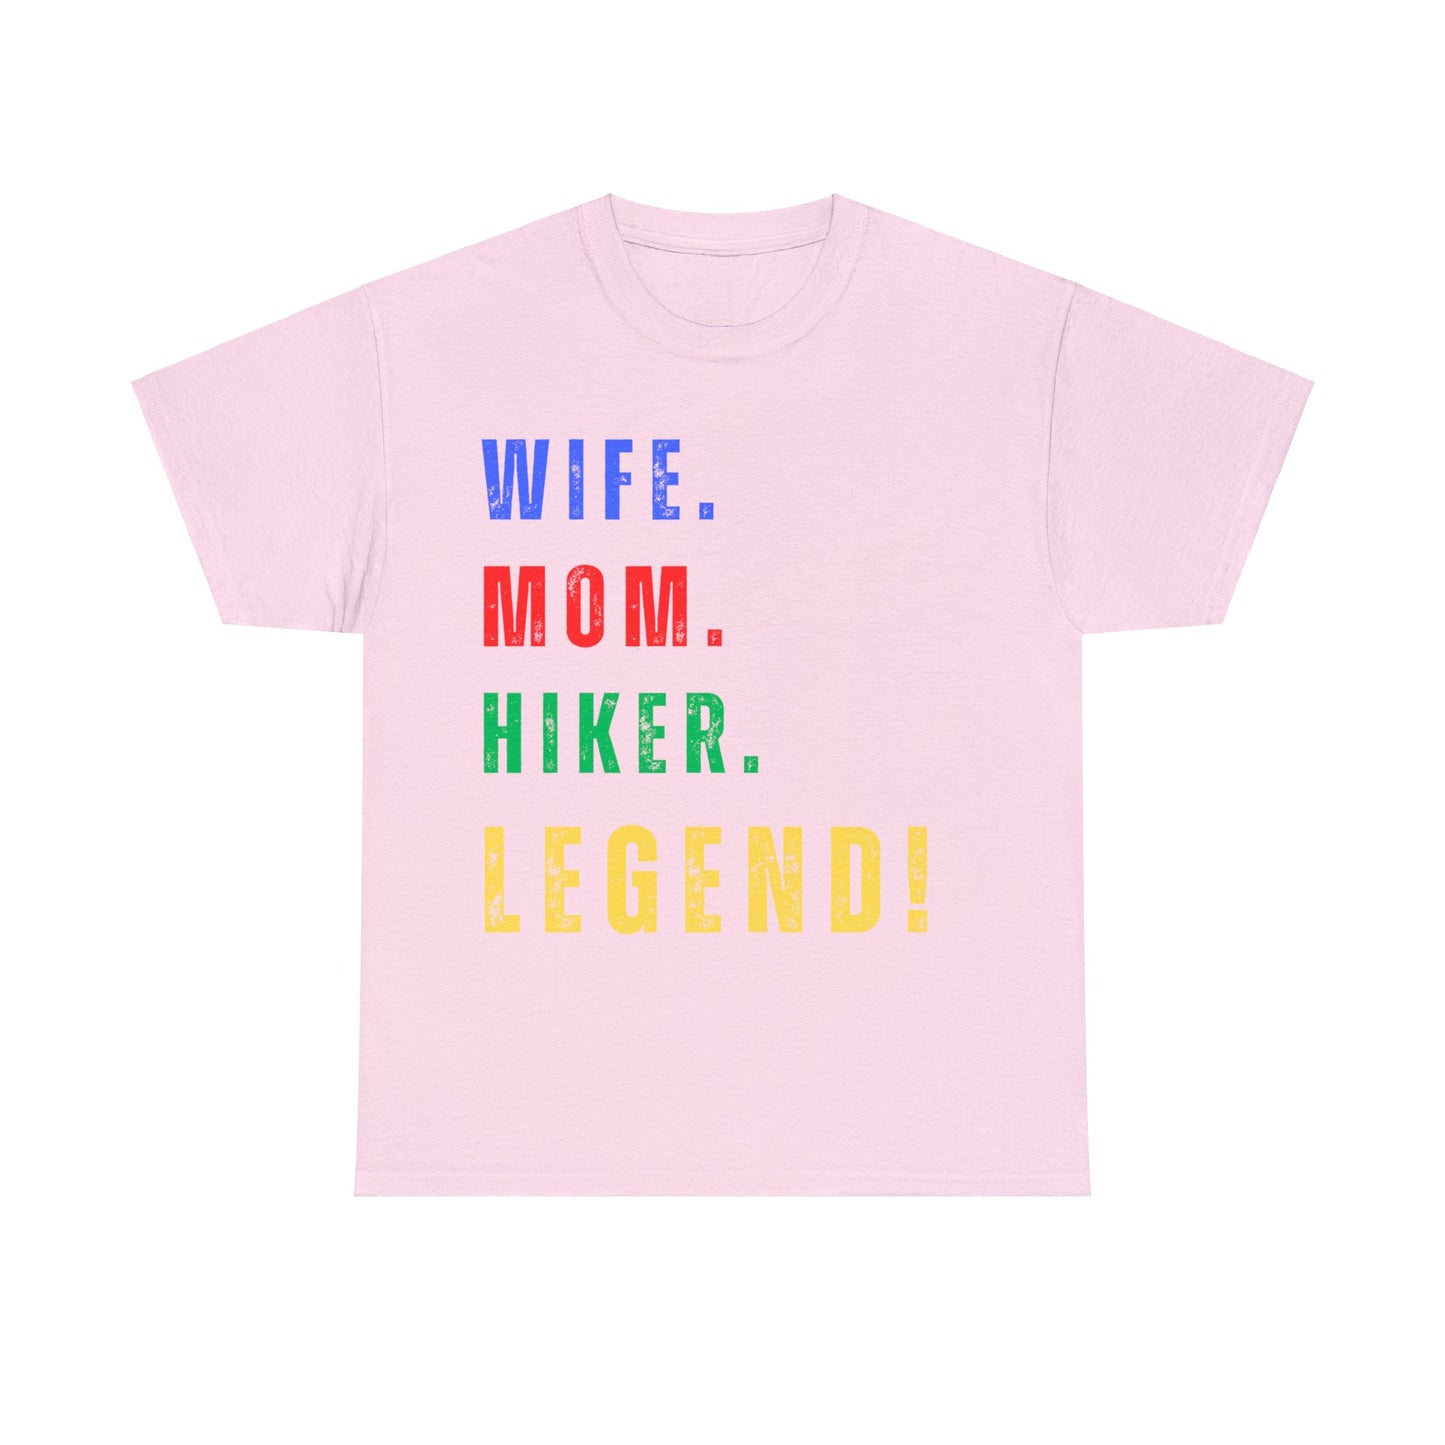 WIFE. MOM. HIKER. LEGEND. T-Shirt - NOT SOLD IN STORES - SPECIAL GIFT - MOTHER'S DAY, Birthday, Hiking, Trekking, Adventure, Women Express Delivery available